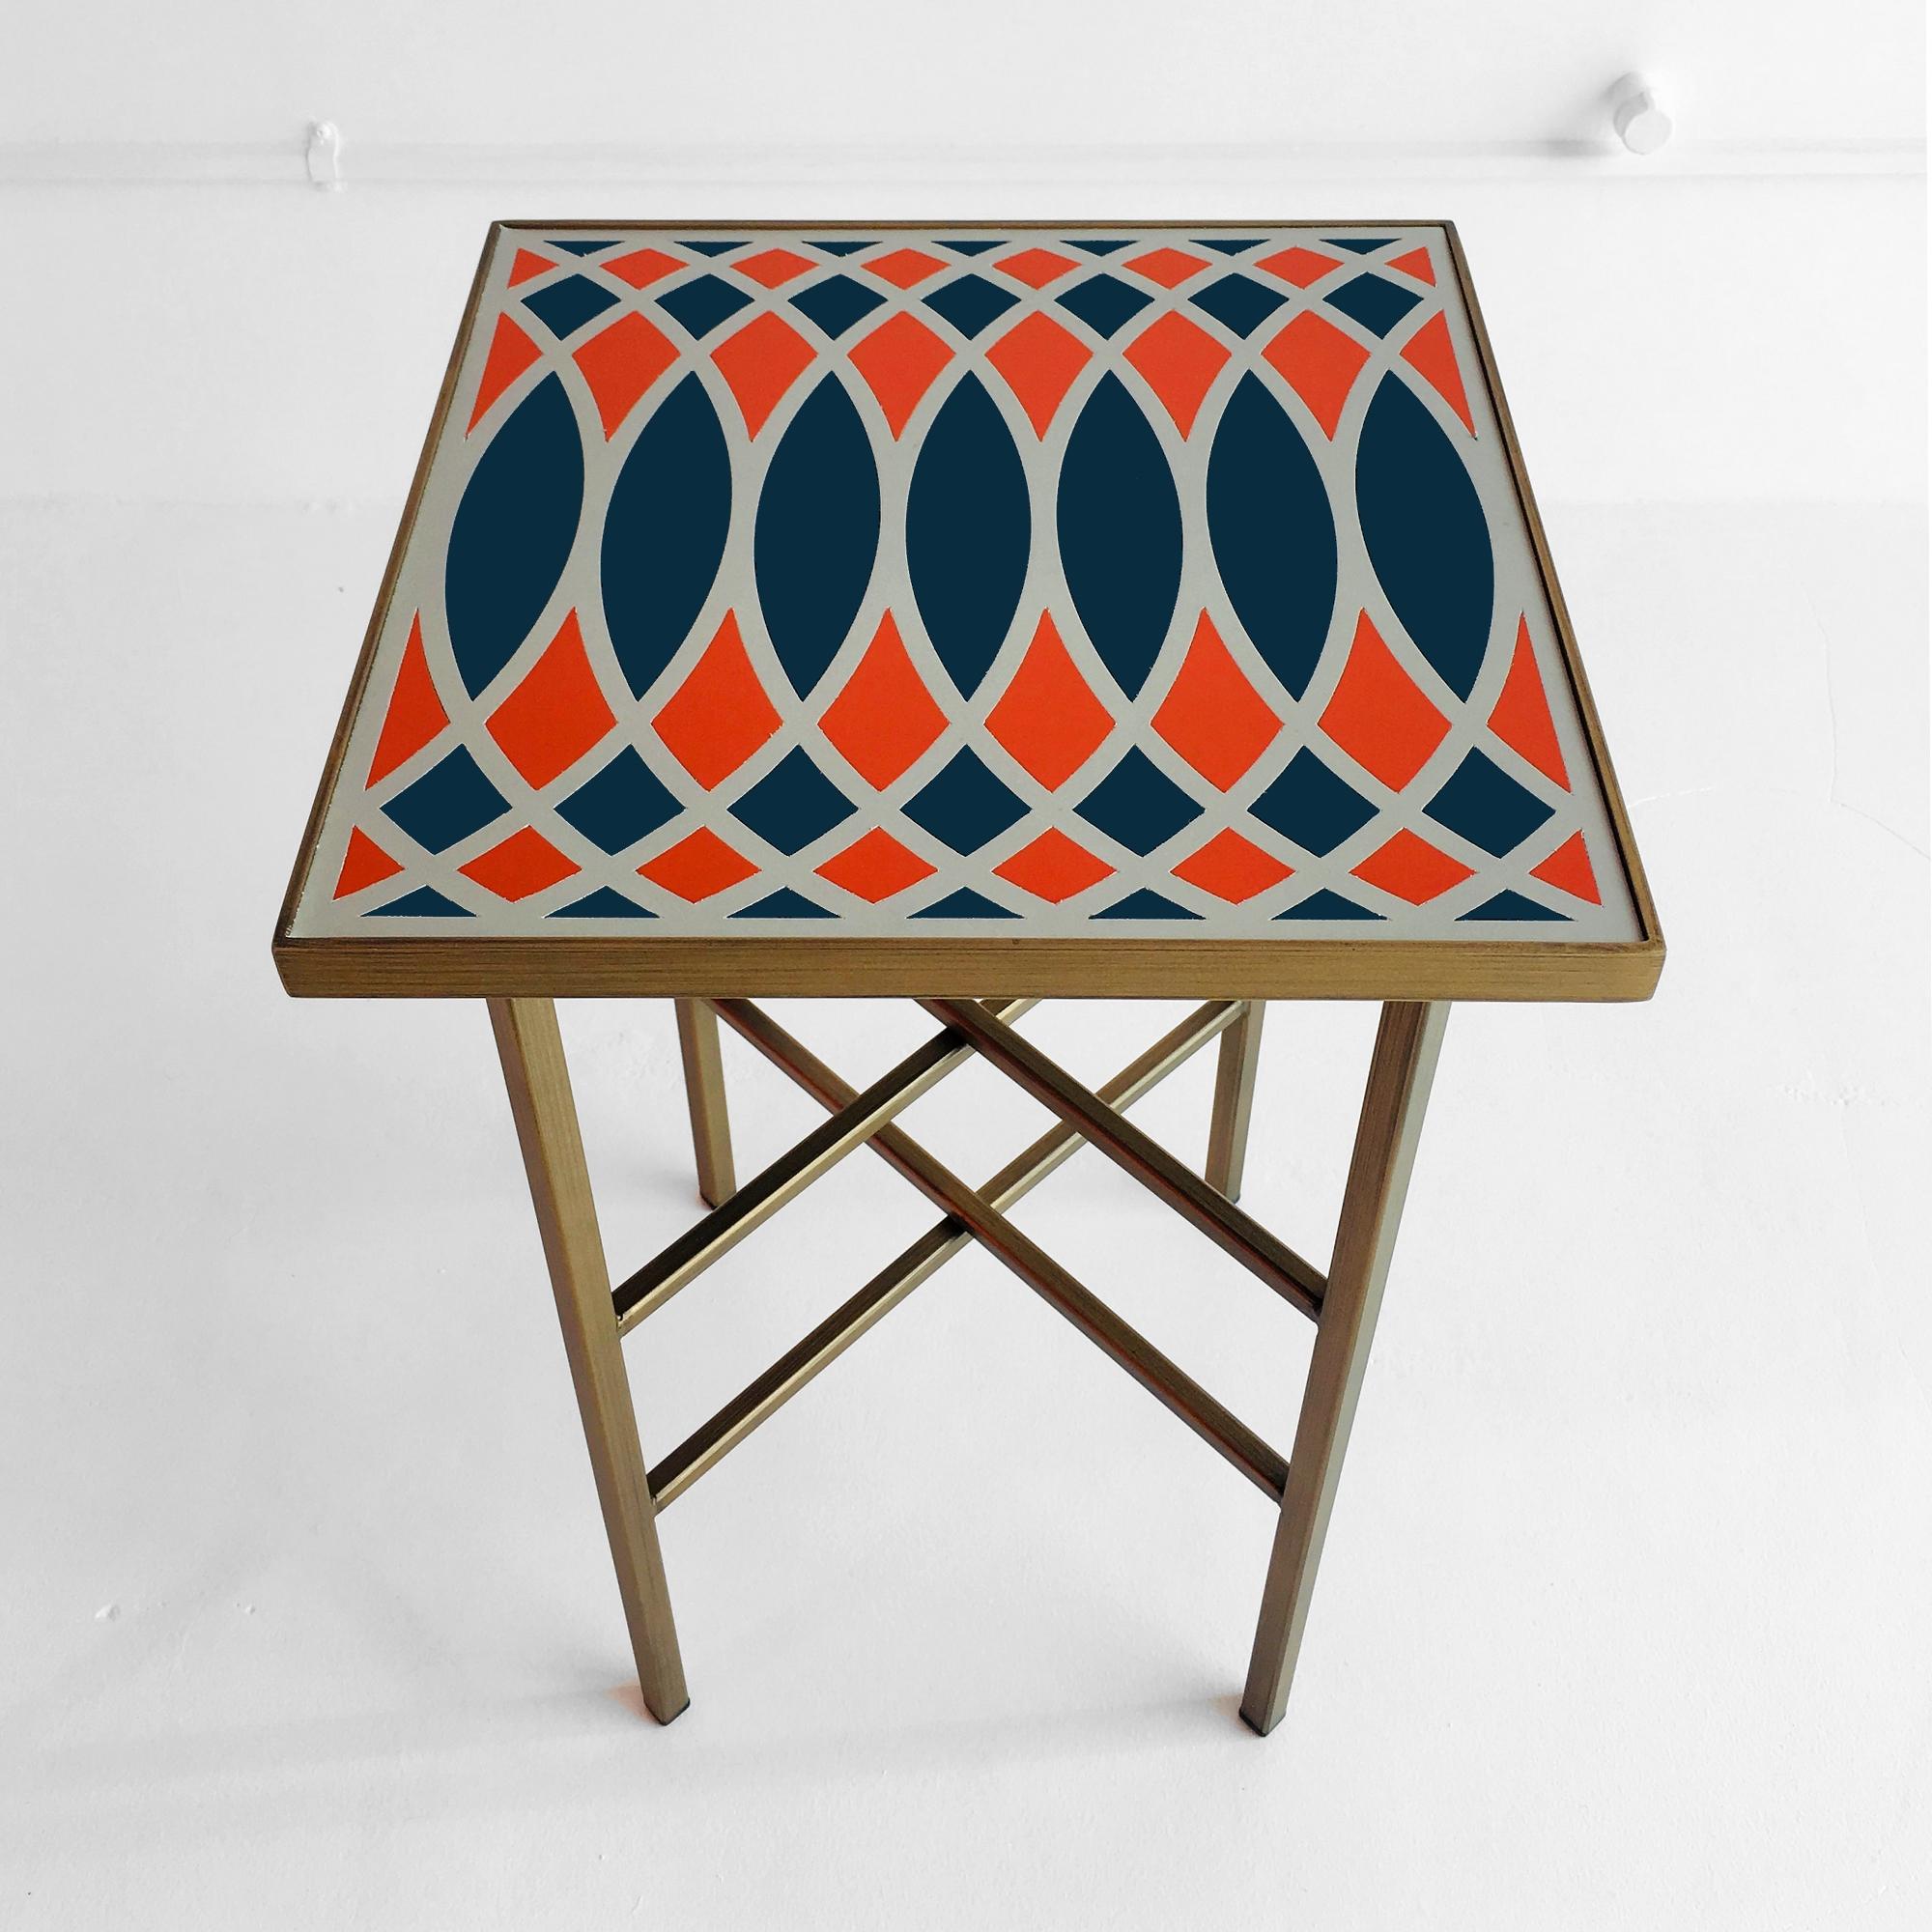 Modern Motif Side Table Designed by Analogia Project, Made in Italy For Sale